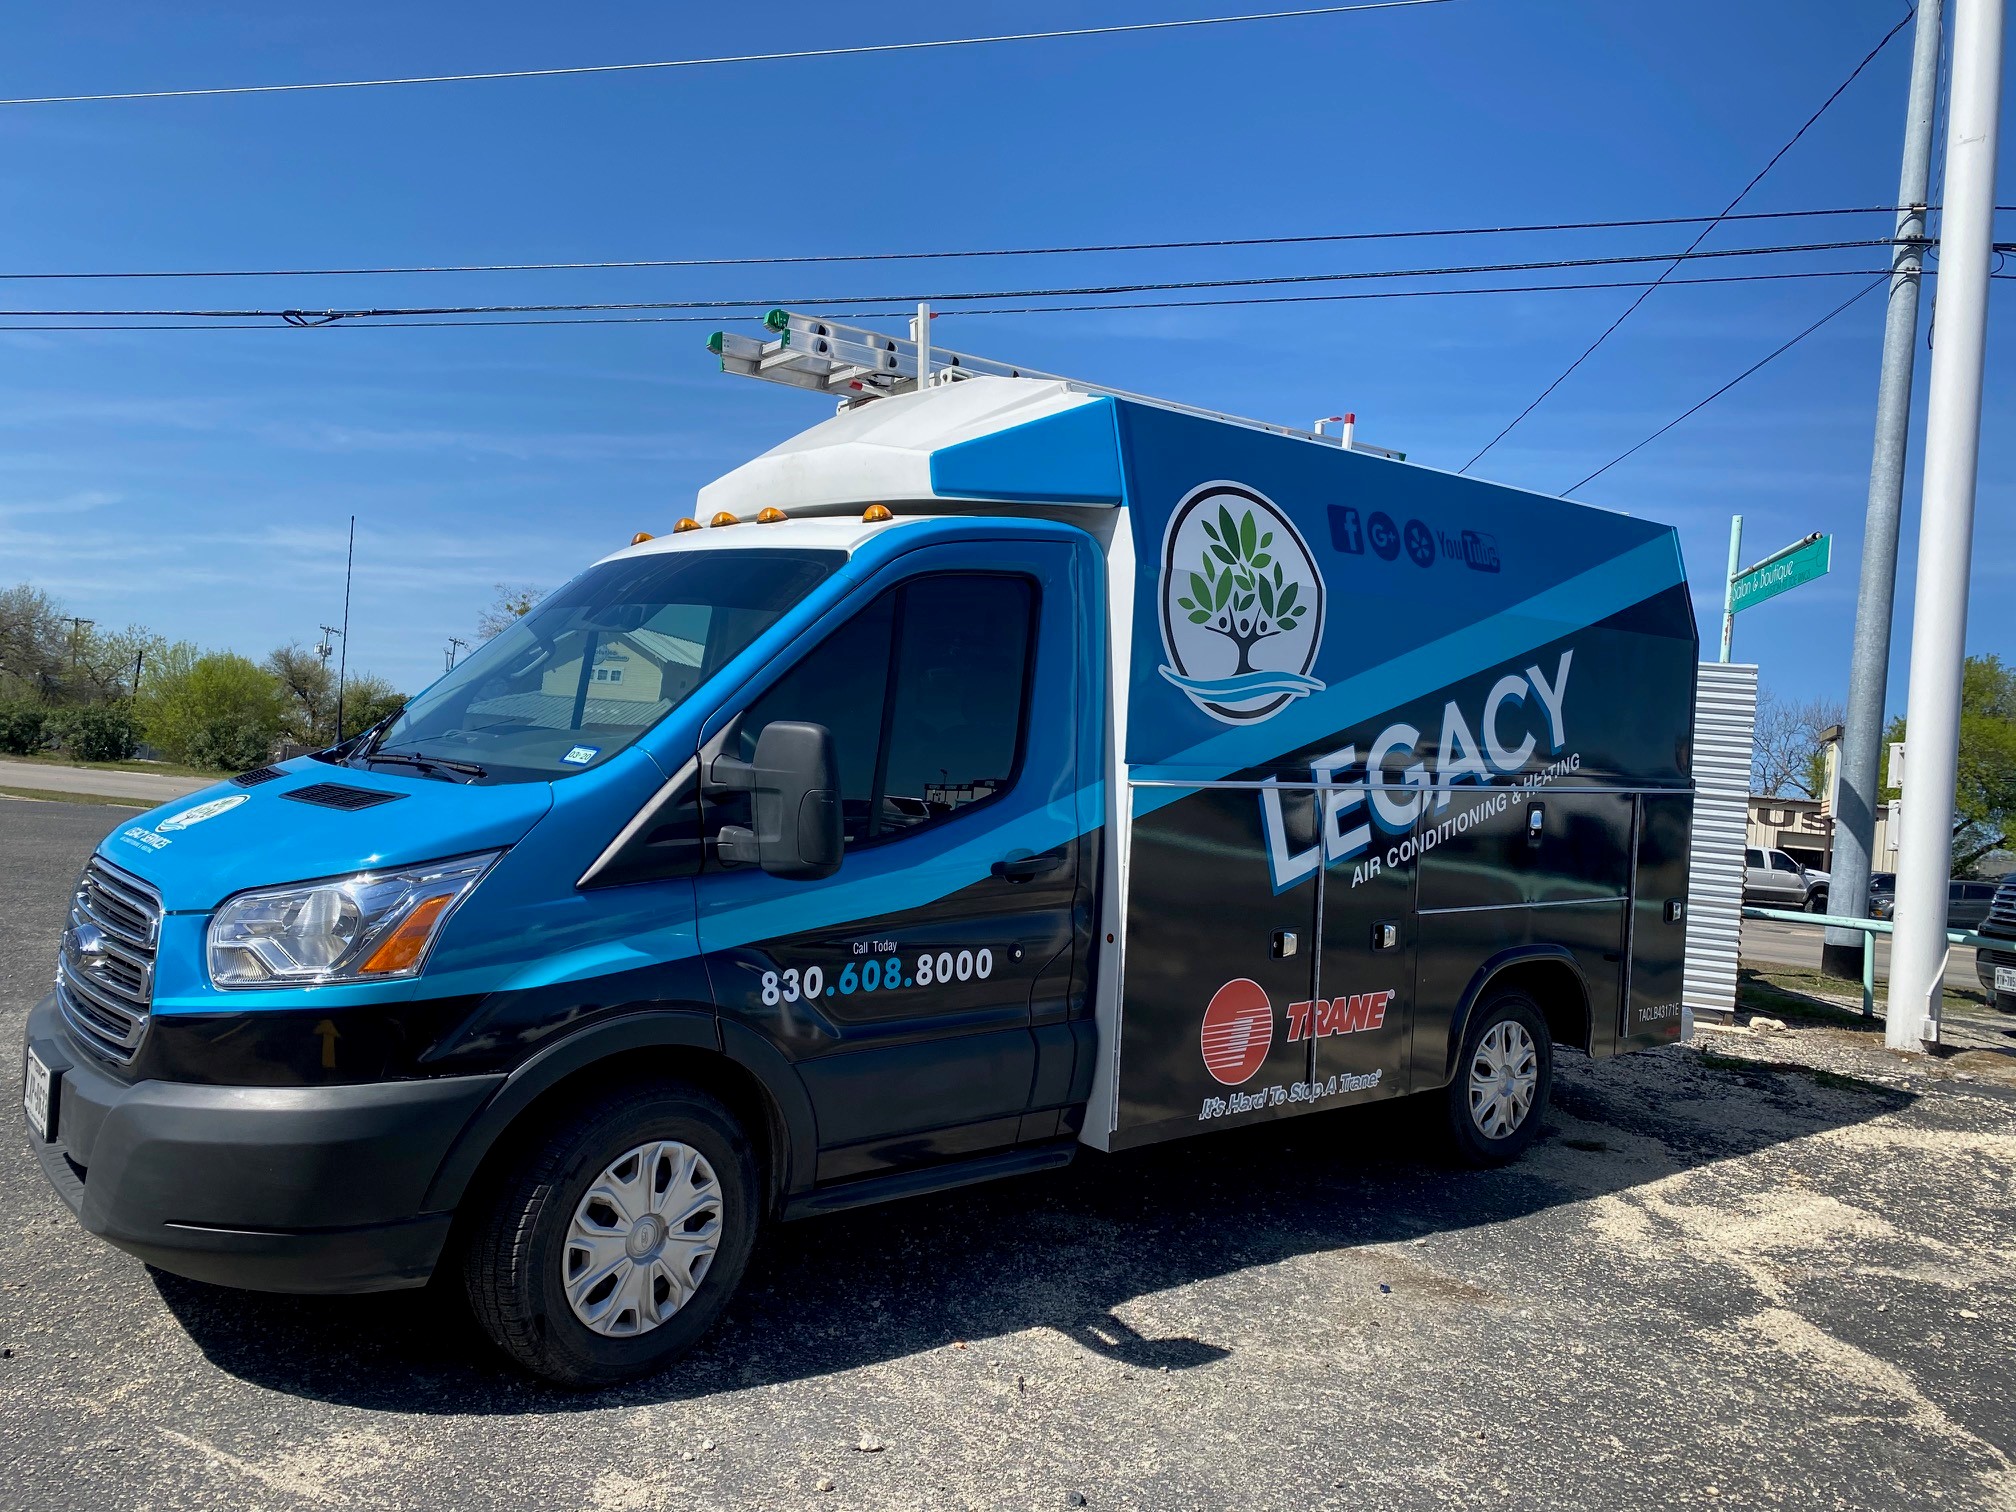 Legacy Services Air Conditioning & Heating truck